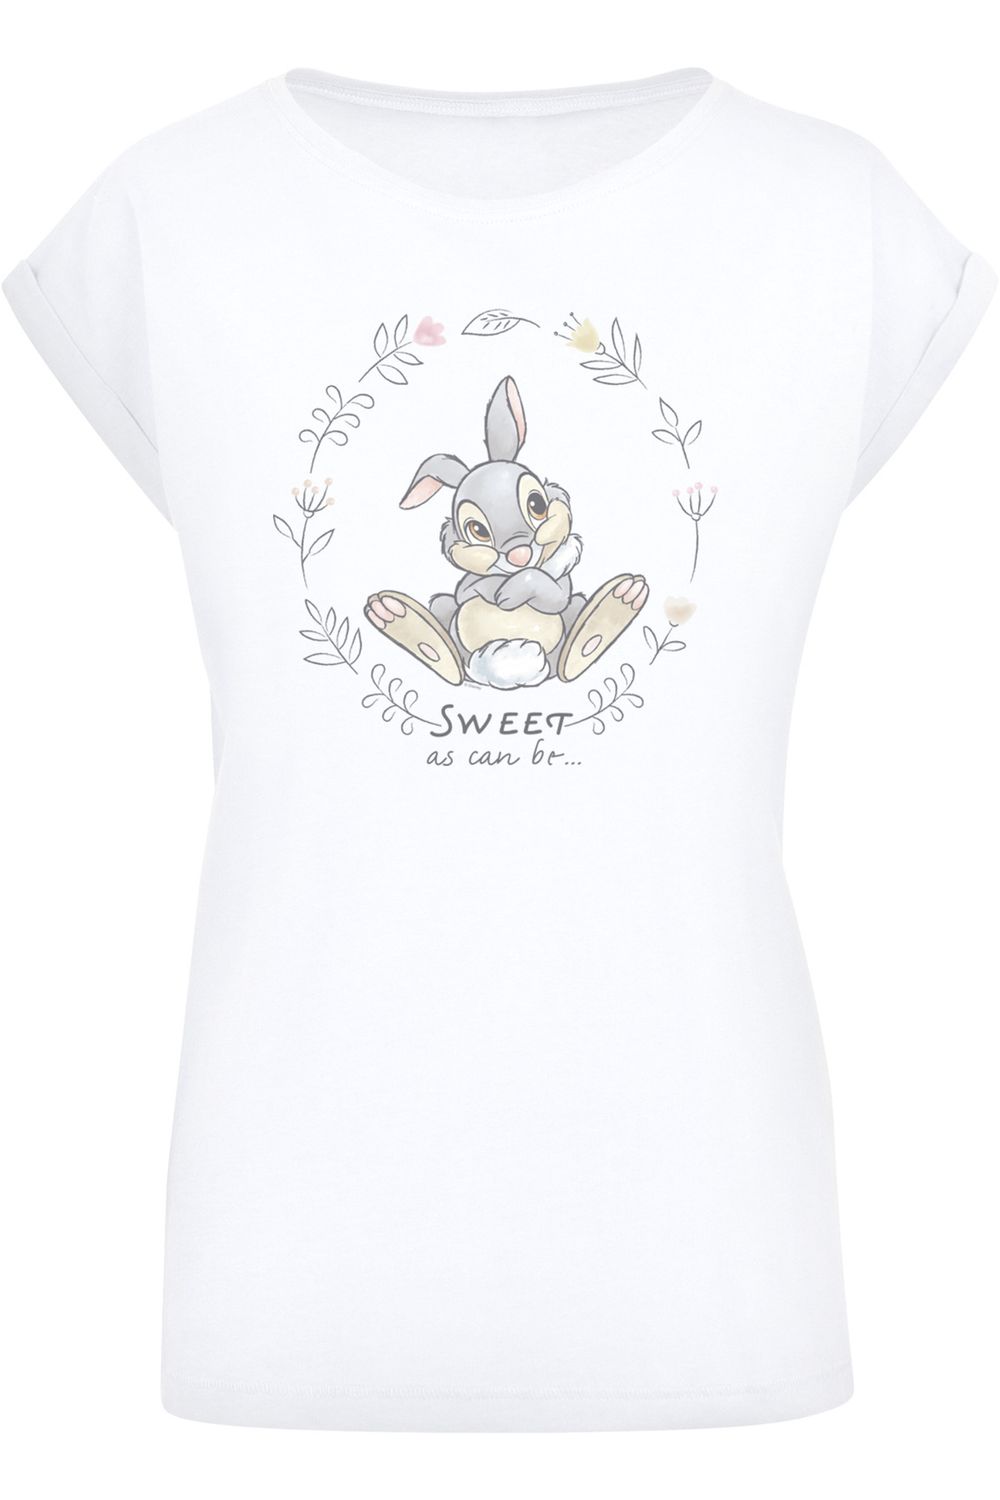 F4NT4STIC Damen T-Shirt Bambi As Be-WHT Thumper Shoulder Trendyol mit Sweet Can Extended Ladies - Disney